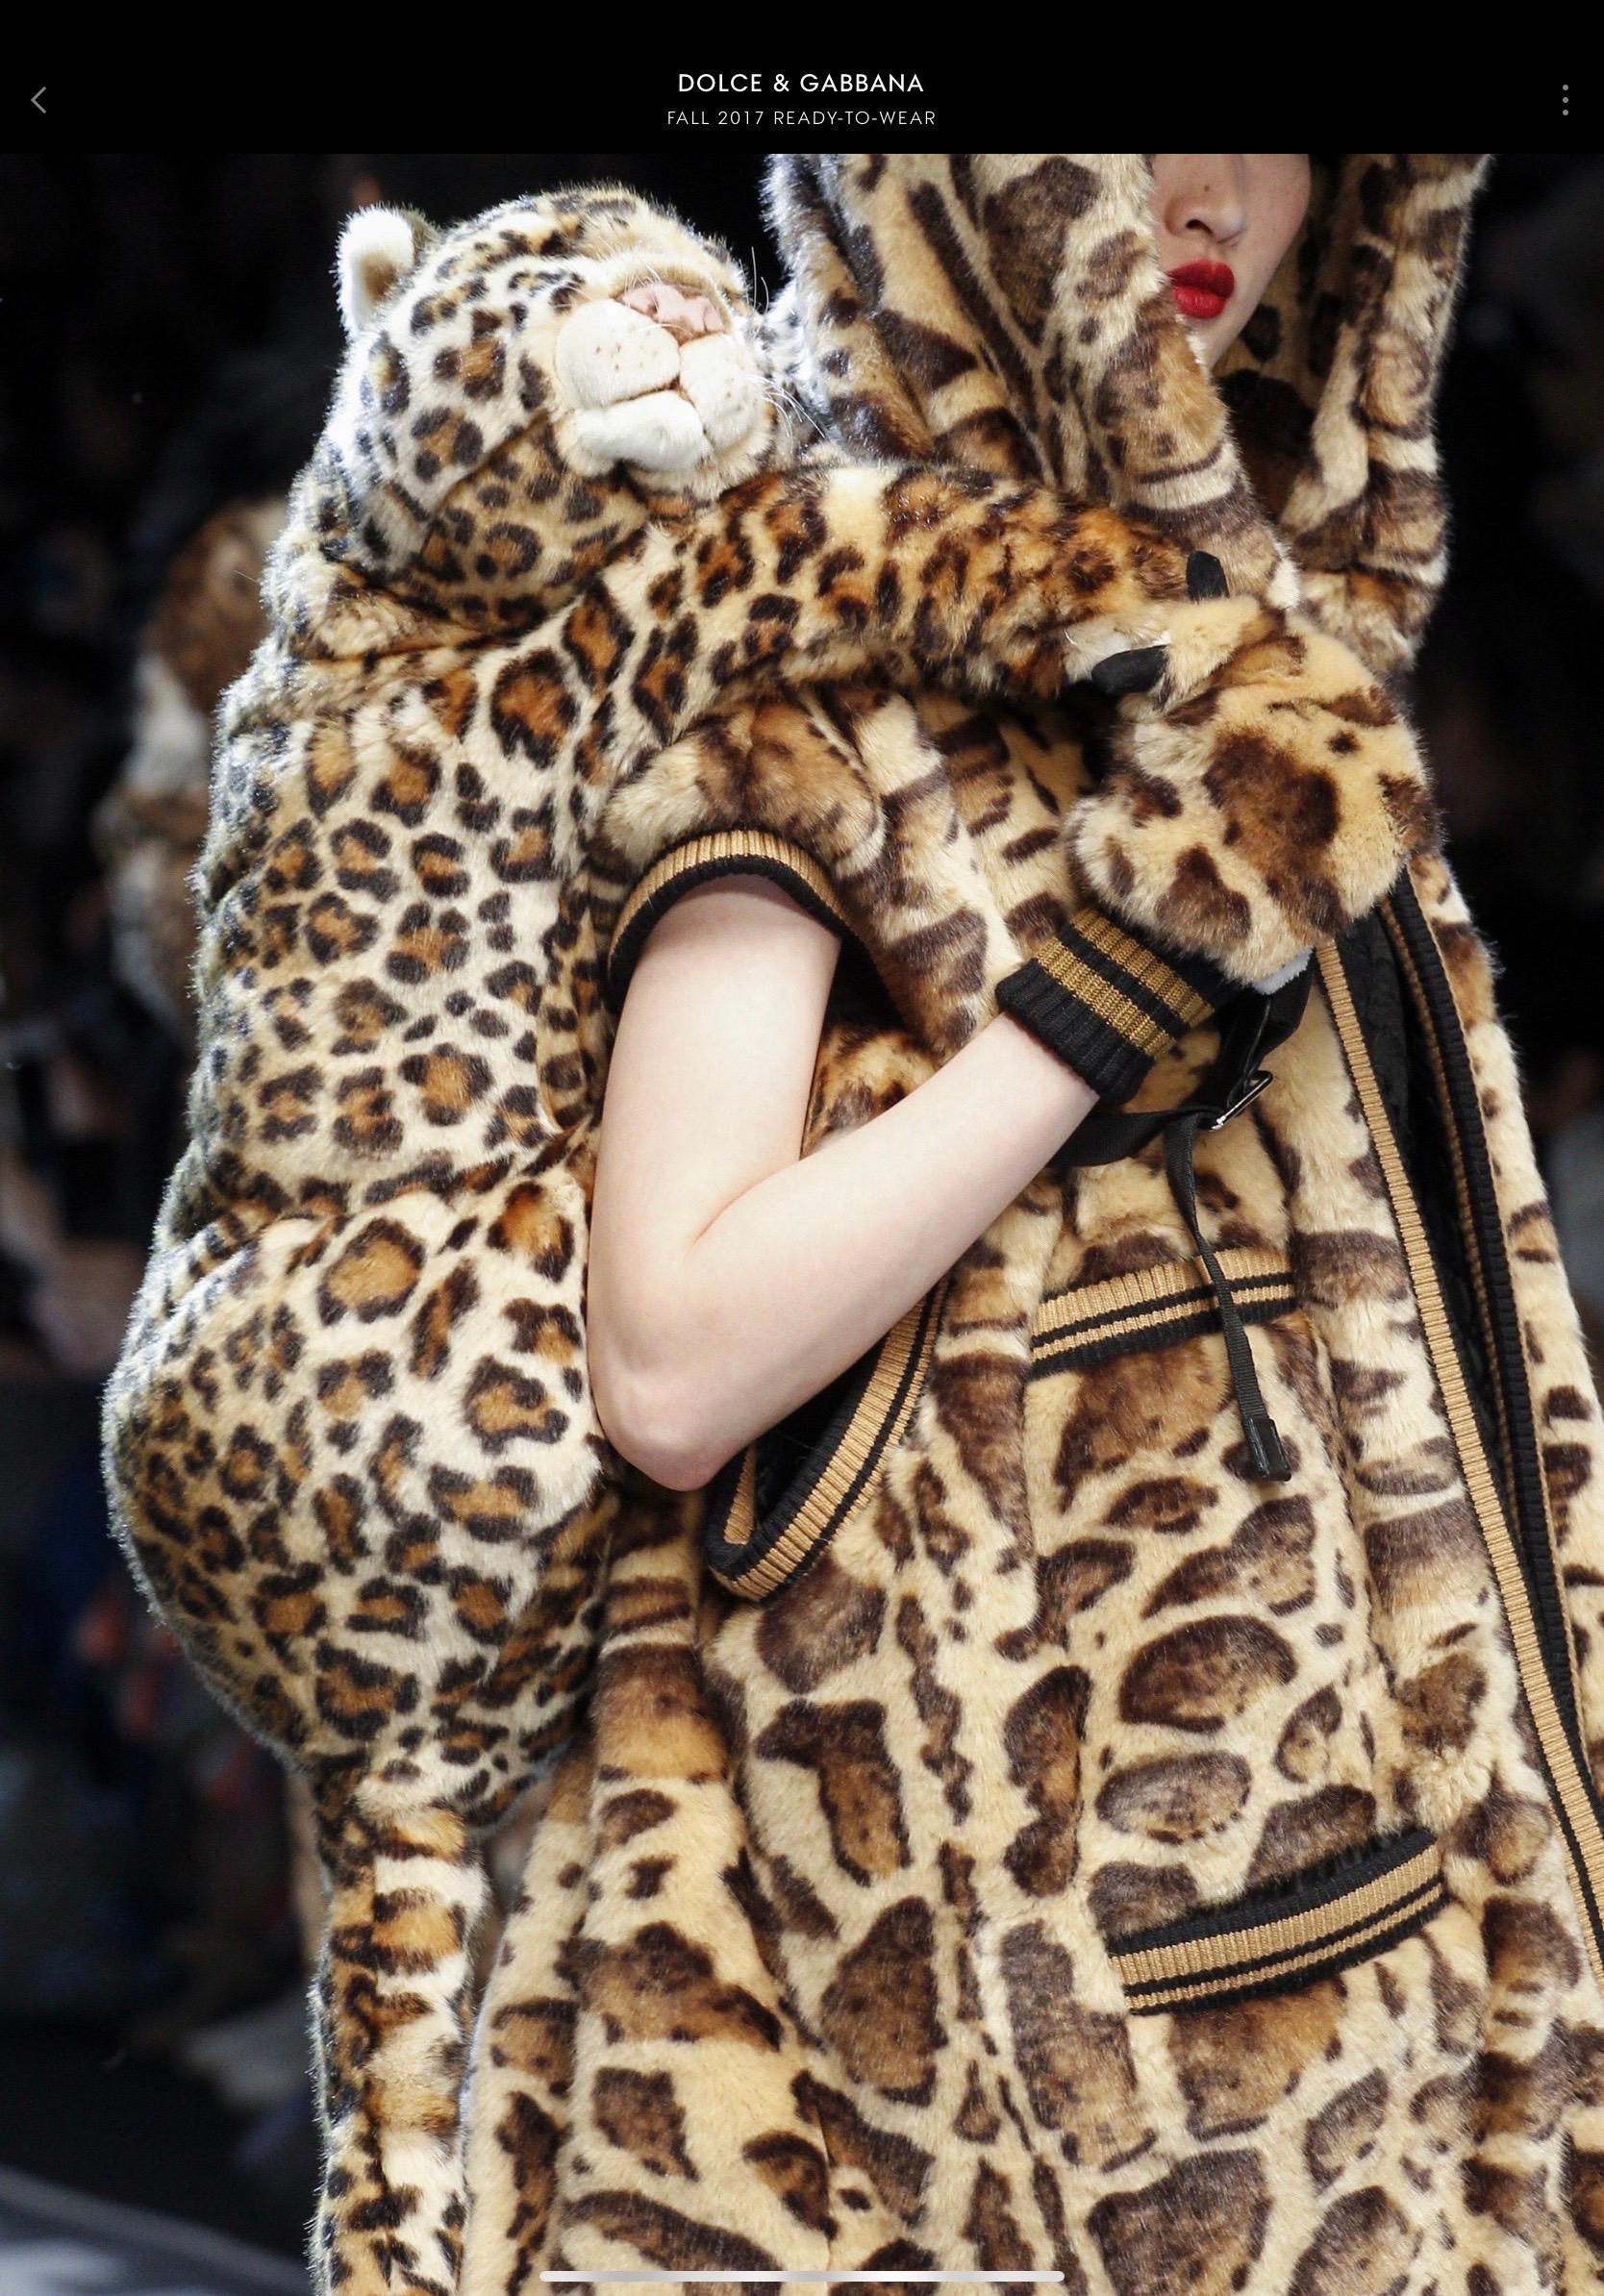 Dolce and Gabbana Fall 2017 RTW leopard Jacket For Sale 5